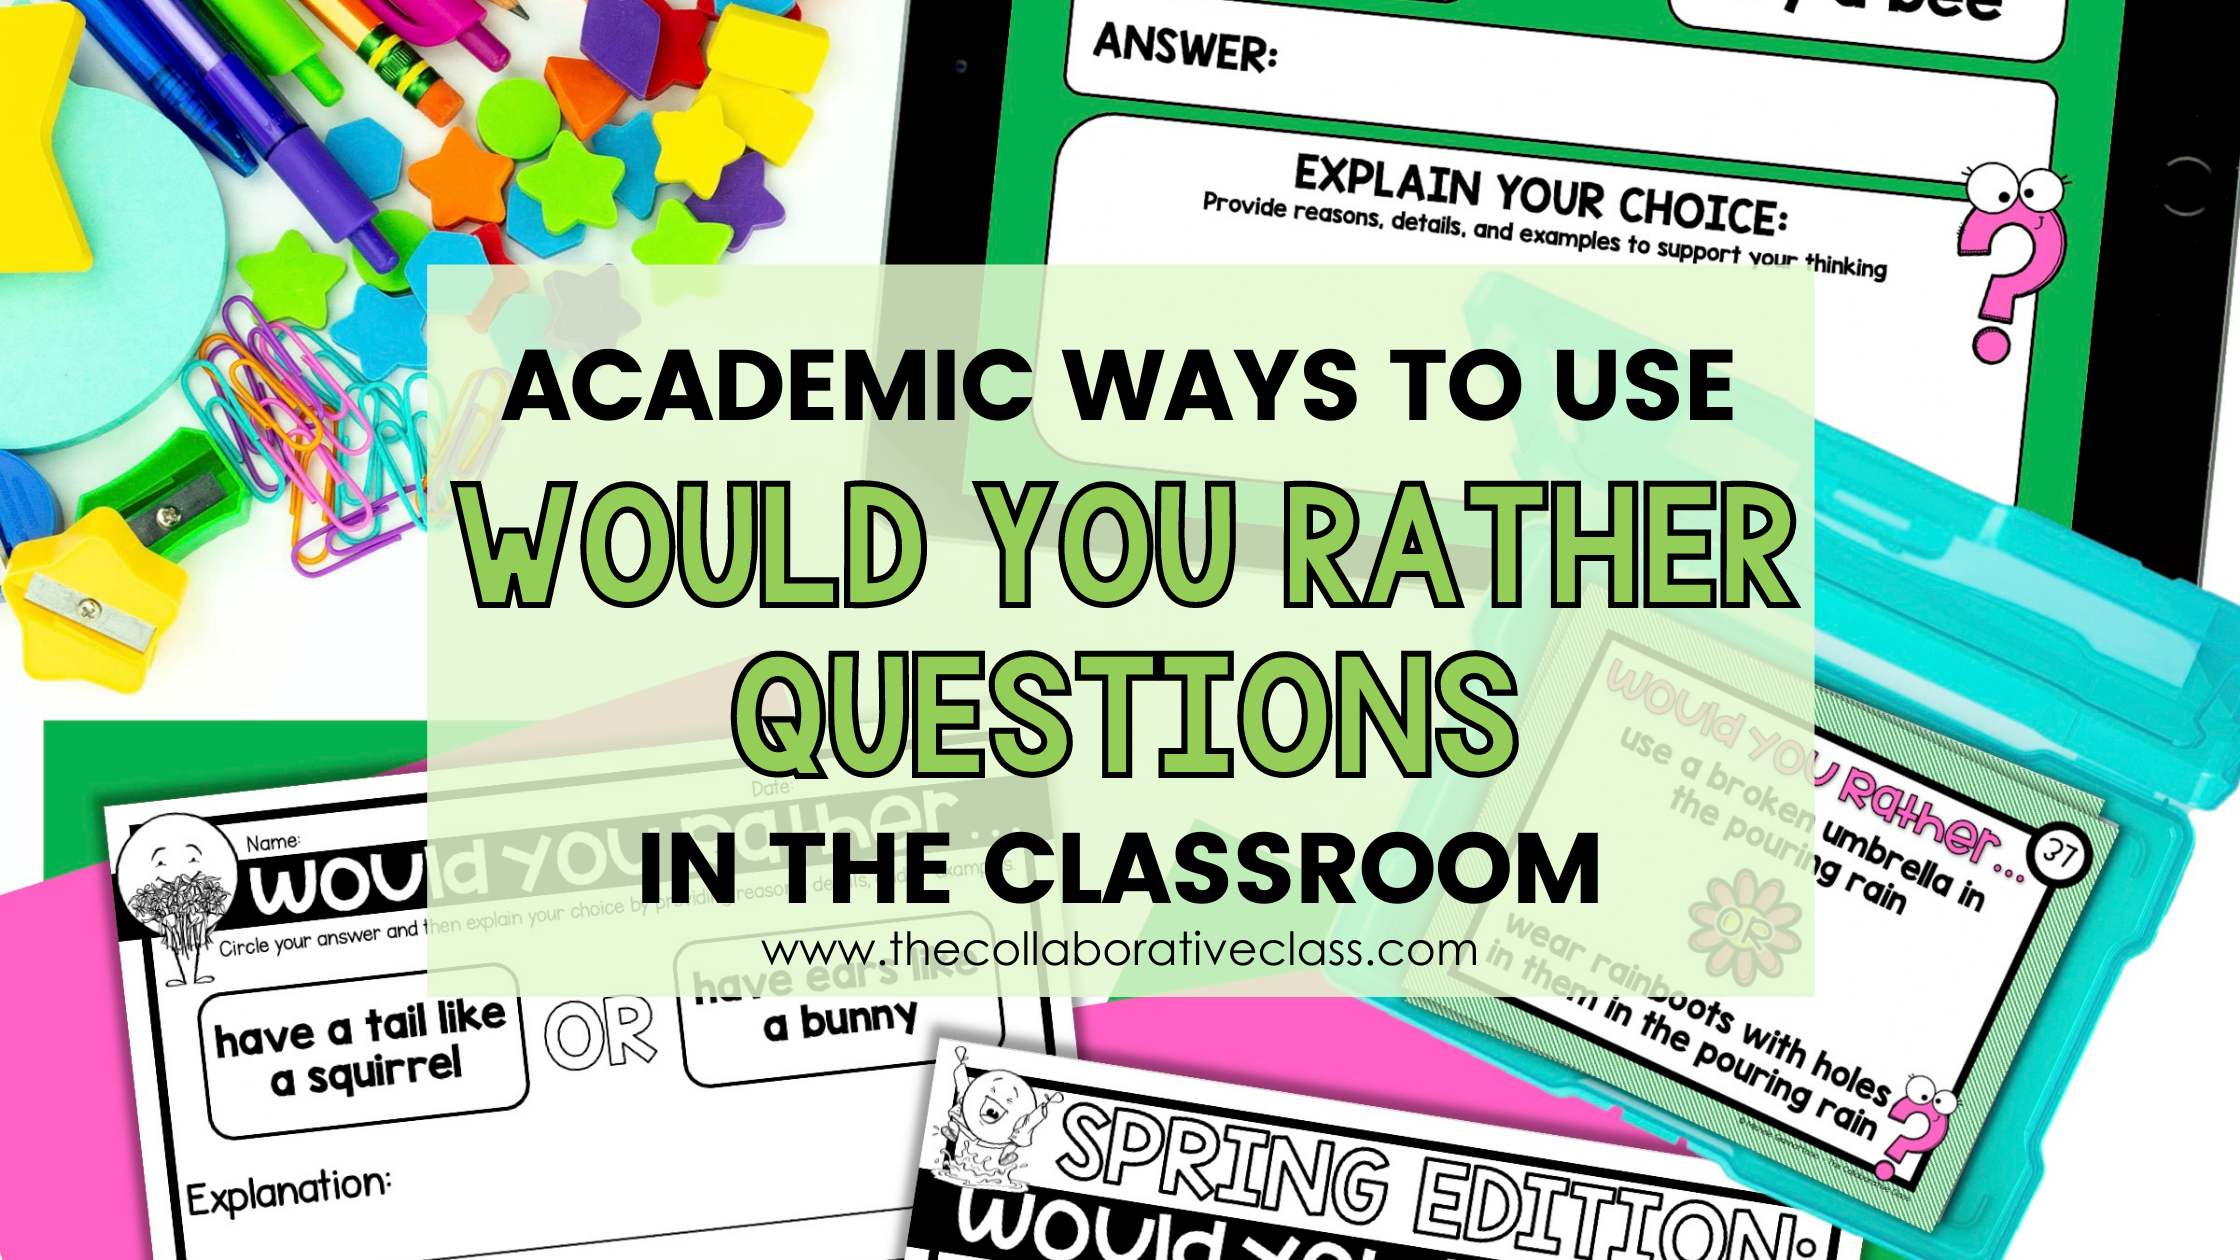 Academic Ways to Use Would You Rather Questions for Kids in the Classroom -  The Collaborative Class